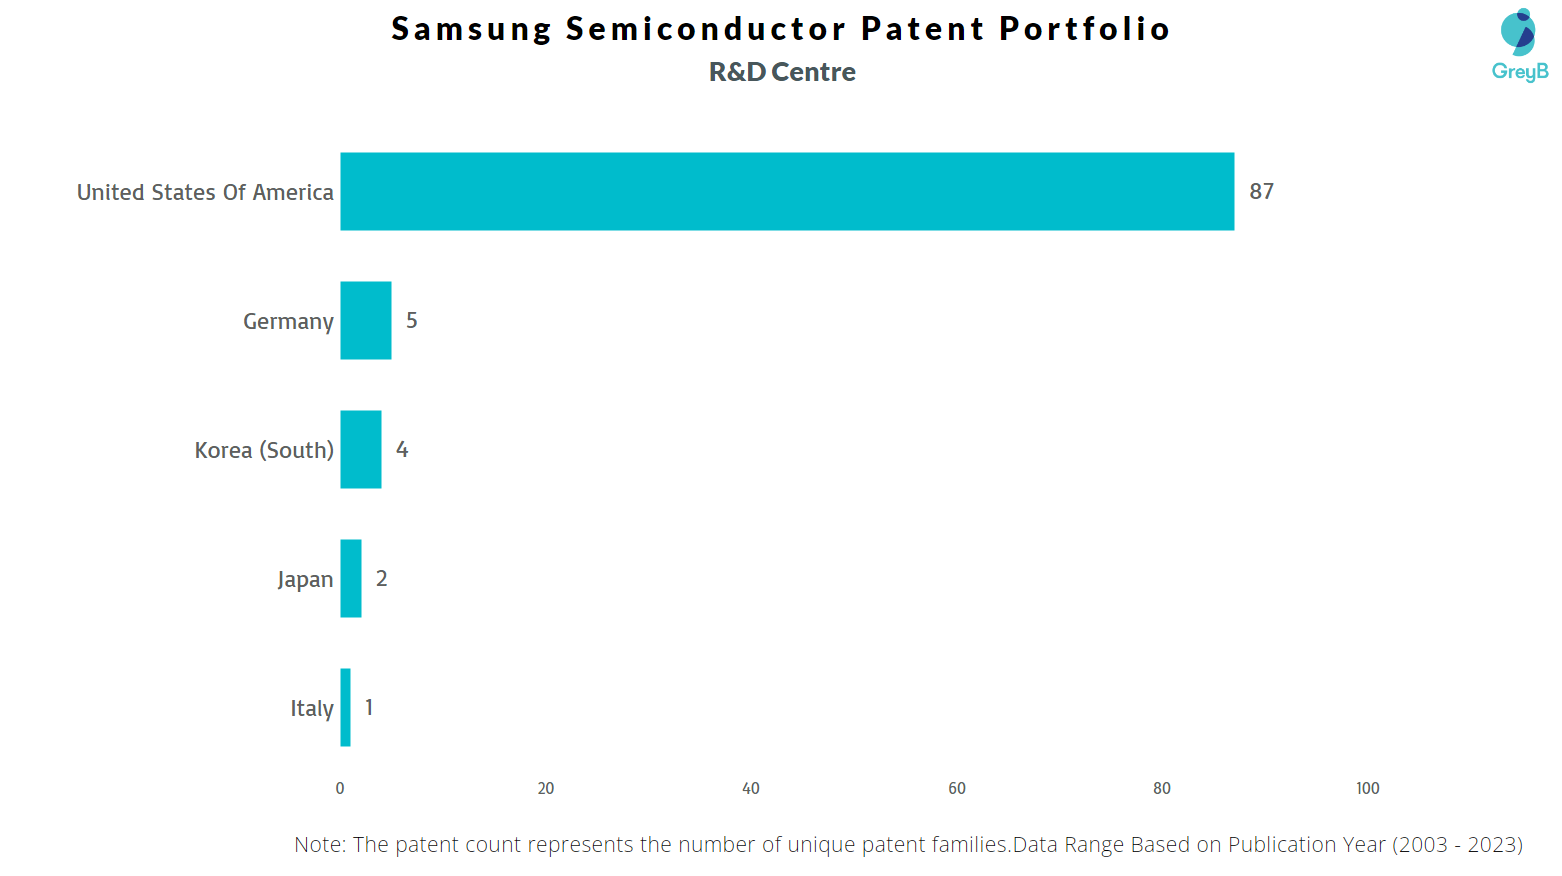 R&D Centers of Samsung Semiconductor